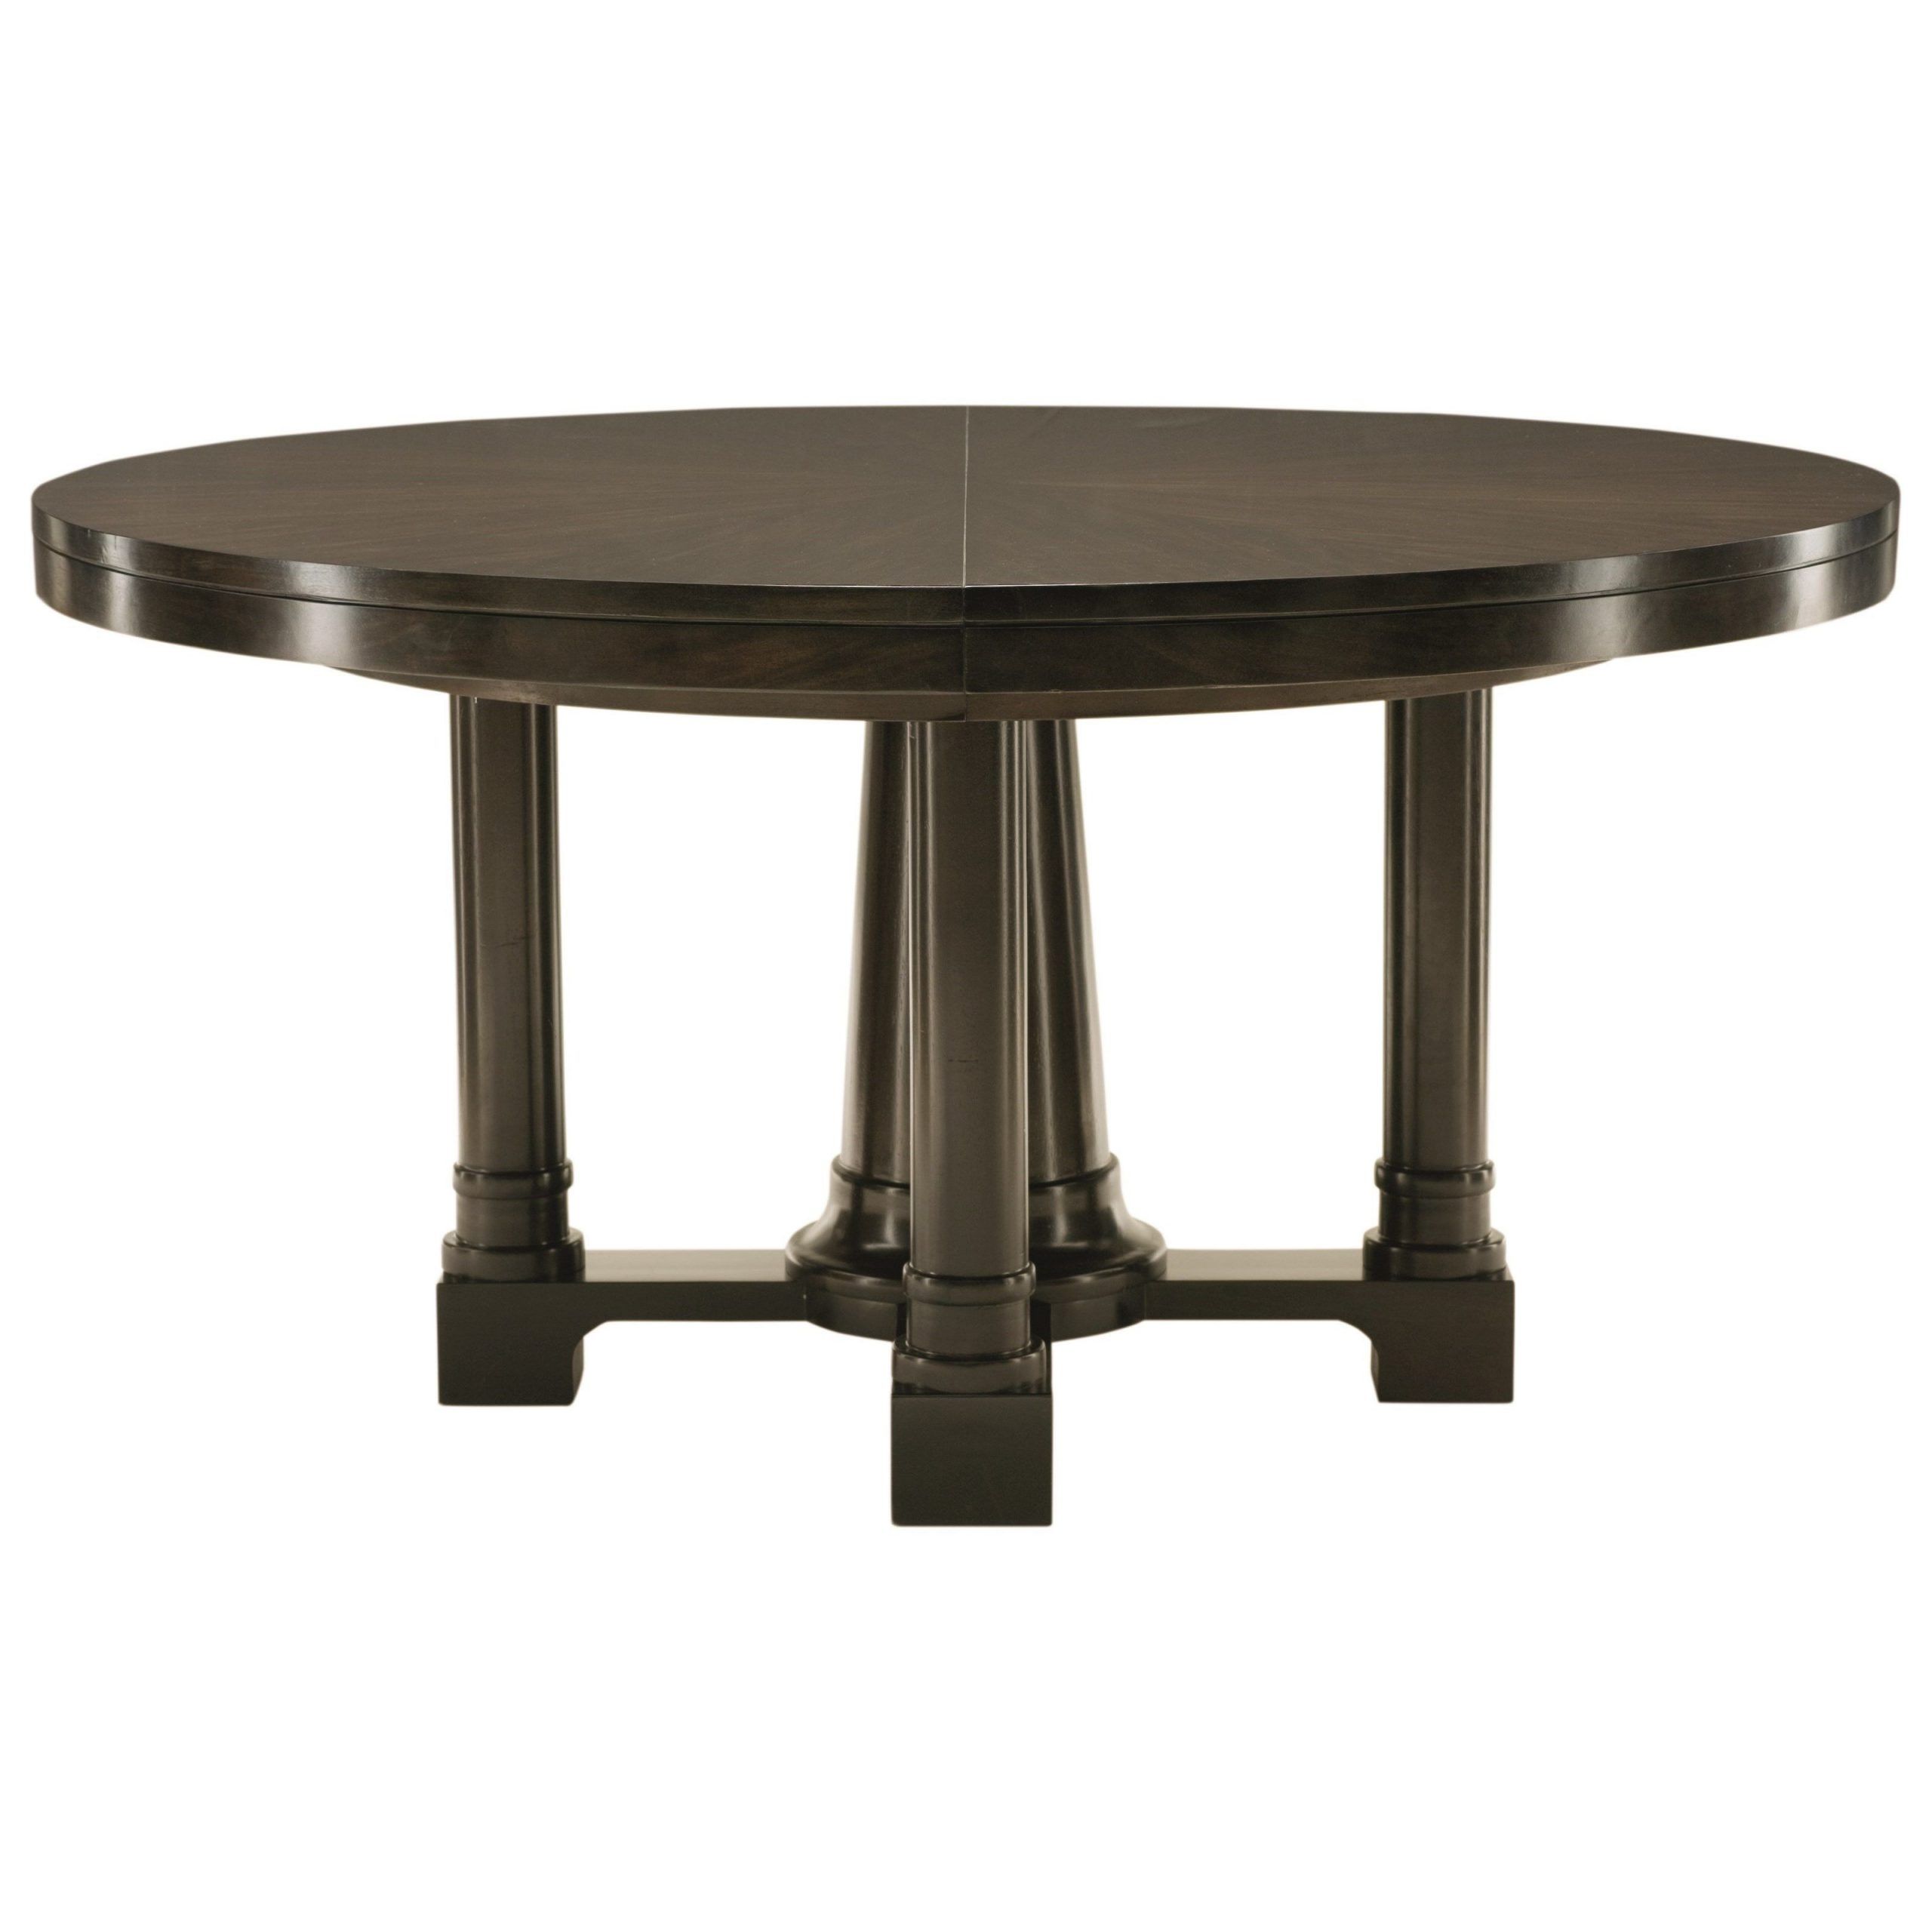 Canalou 46'' Pedestal Dining Tables With Latest Sutton House Round Pedestal Dining Tablebernhardt At (Gallery 18 of 20)